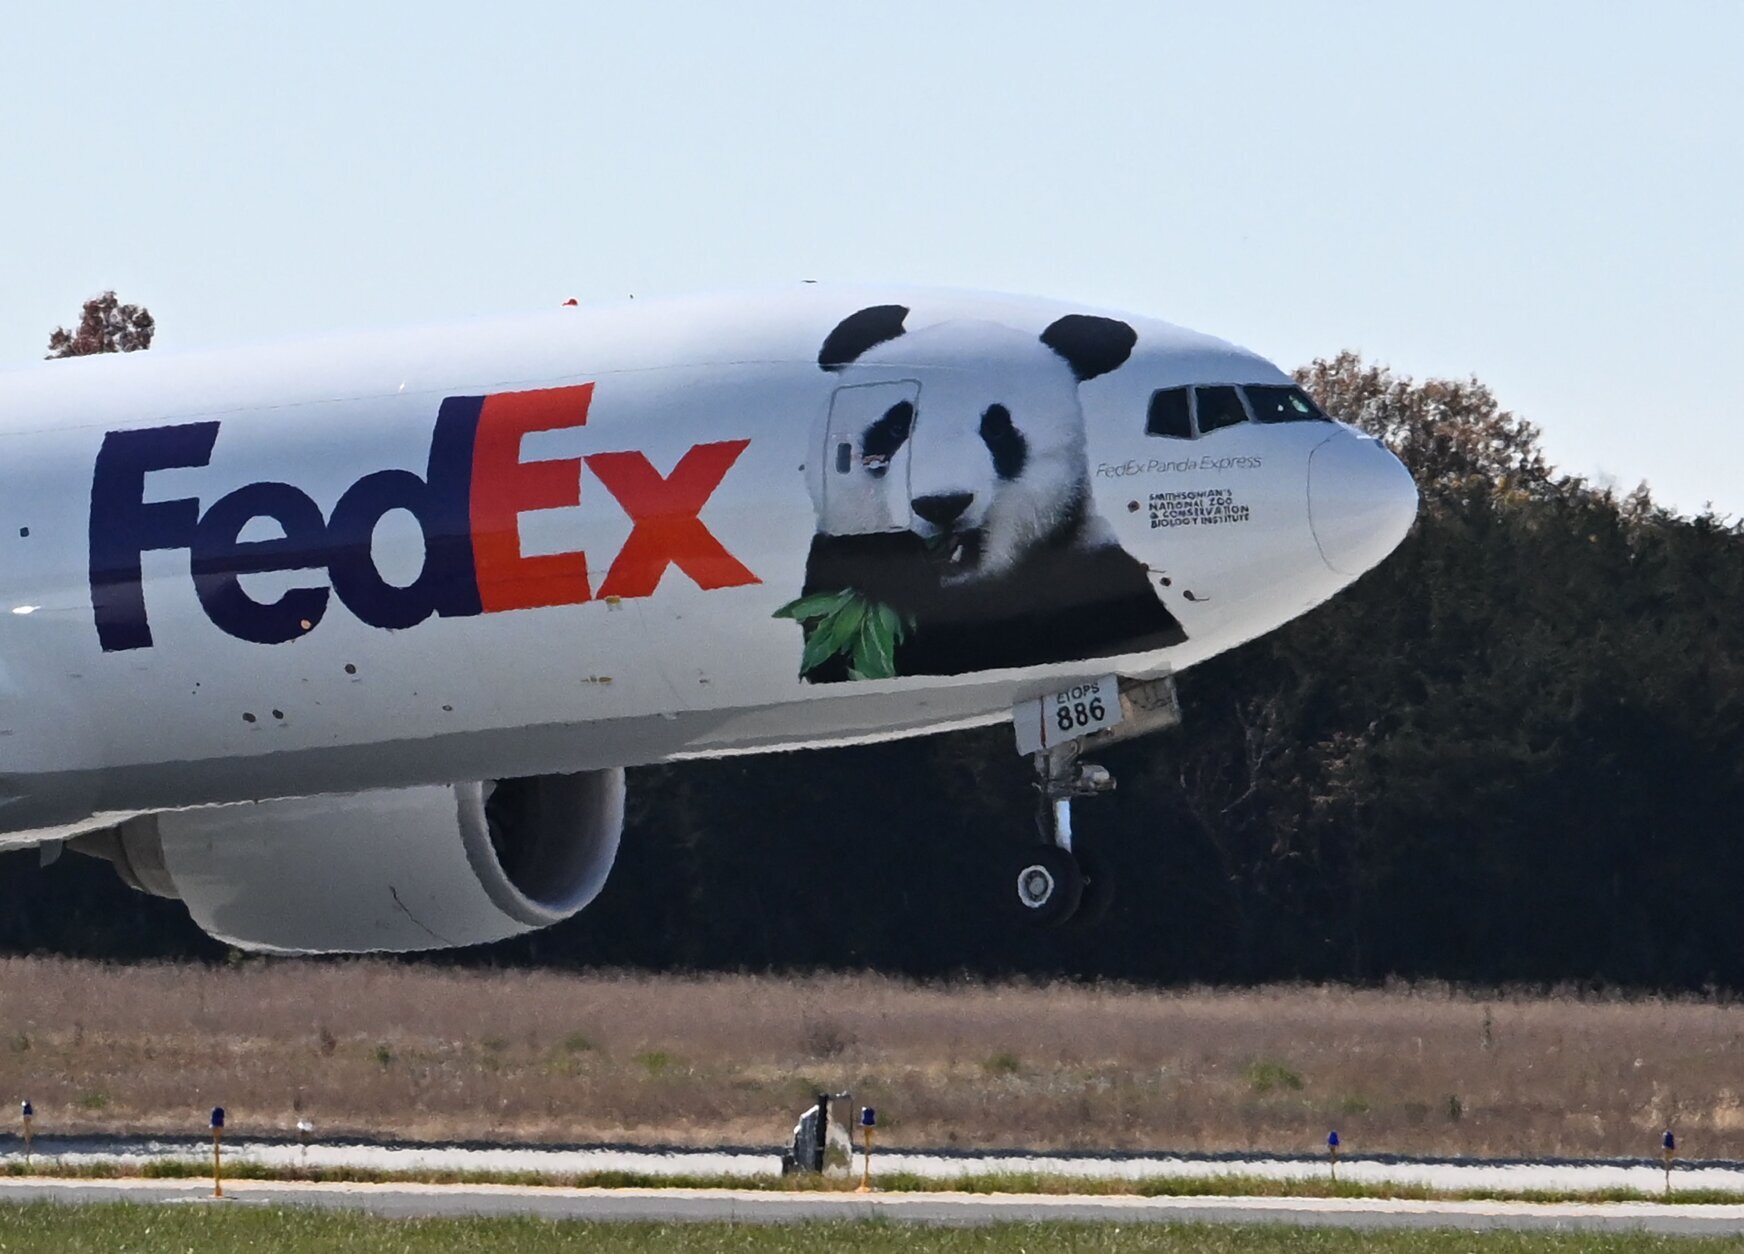 The Panda Express takes off as it transports Giant Pandas from the Smithsonian's National Zoo at Dulles International Airport in Dulles, Virginia, on November 8, 2023. All three of the zoo's pandas are leaving for China, bringing at least a temporary end to a decades-old connection between the cuddly animal and the US capital. And while the pandas' departure had been expected due to contractual obligations, many can't help but see the shift as reflective of the growing strains between Beijing and Washington. (Photo by Jim WATSON / AFP) (Photo by JIM WATSON/AFP via Getty Images)